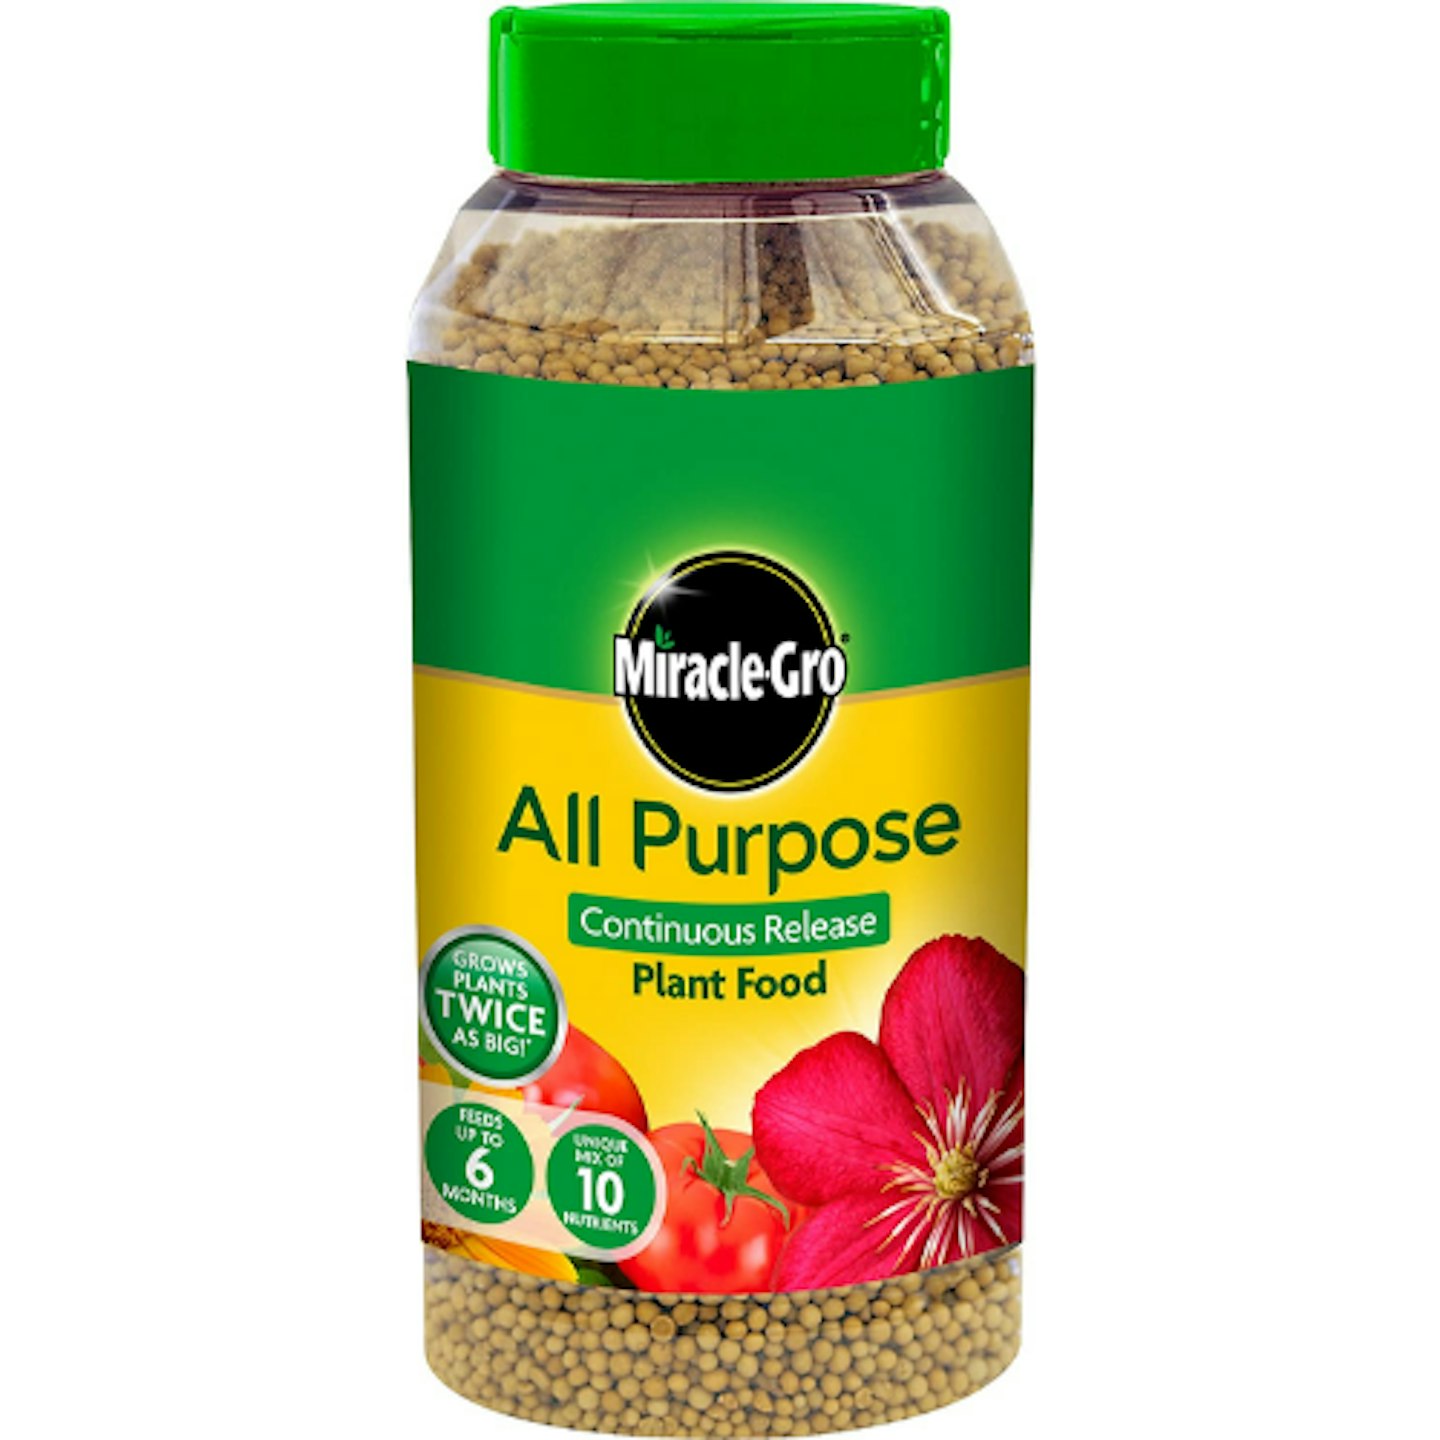 Miracle-Gro 17684 All Purpose Continuous Release Plant Food